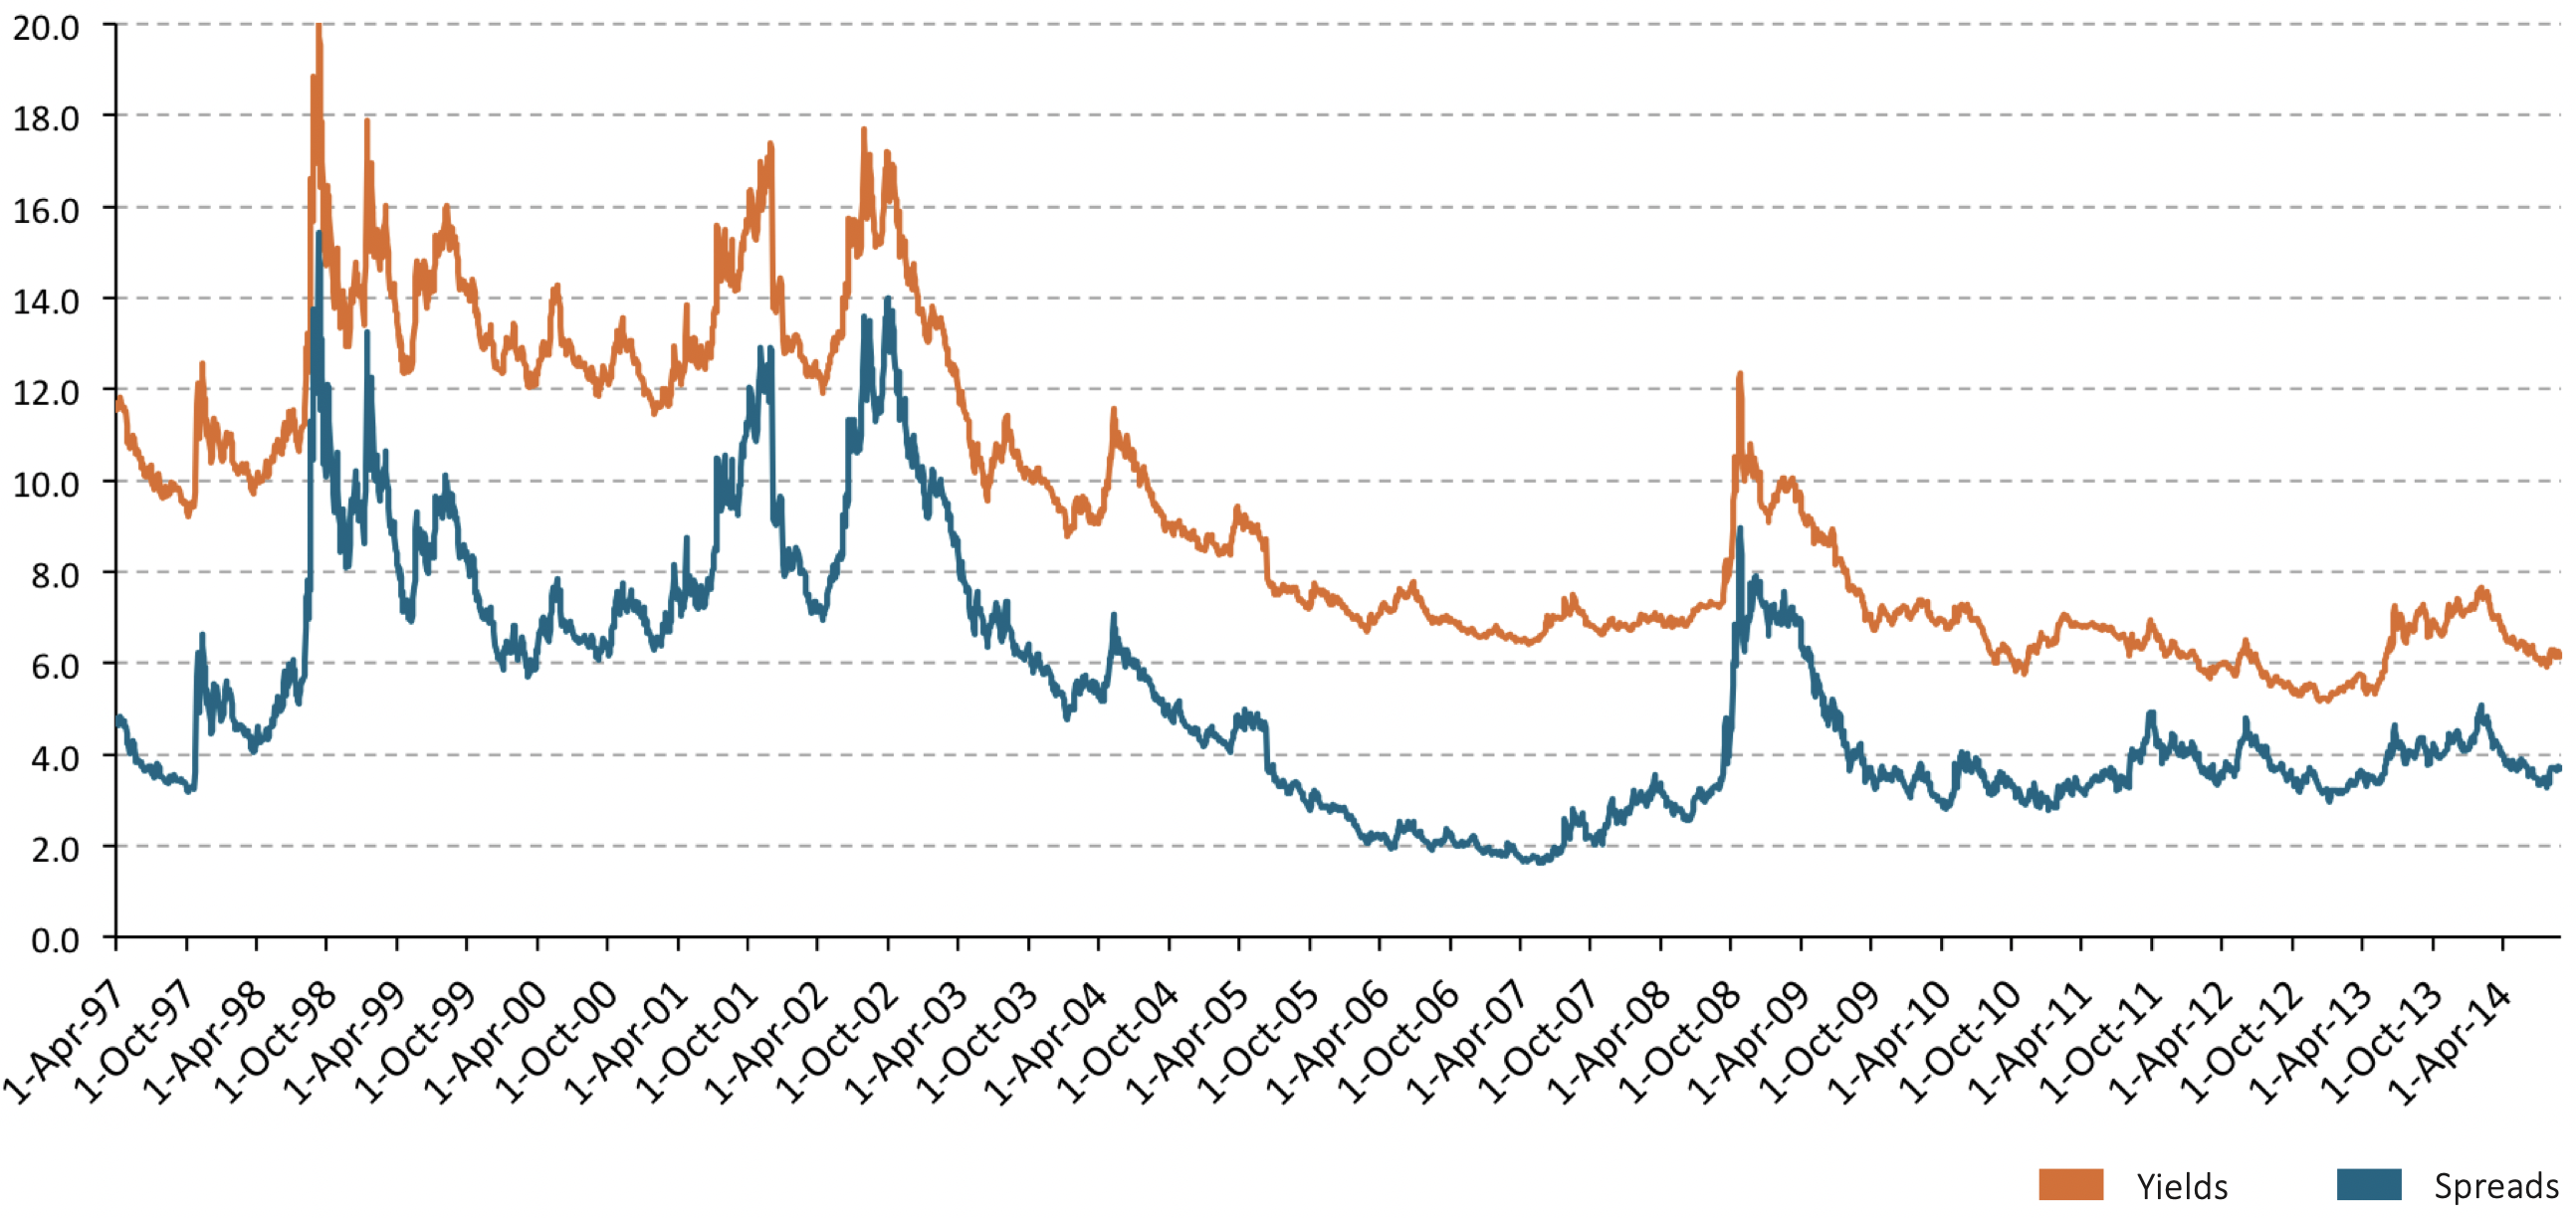 This graph compares risk spreads and yields of Latin American bonds over time.